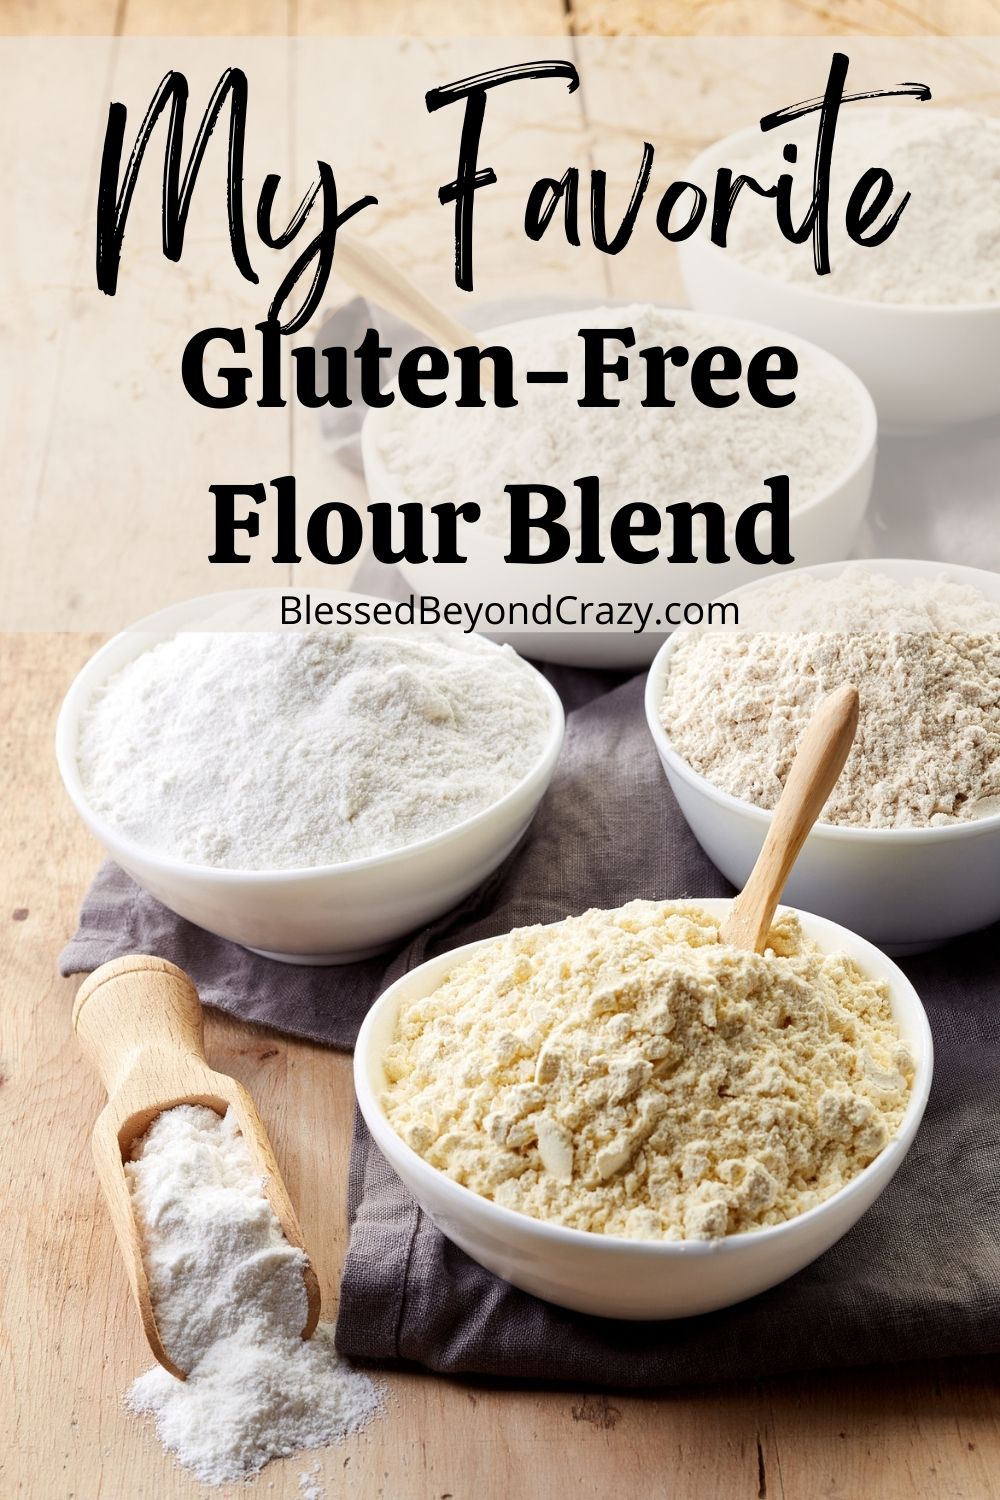 Gluten free all-purpose flour blend Recipe by Kylie McNew - Cookpad